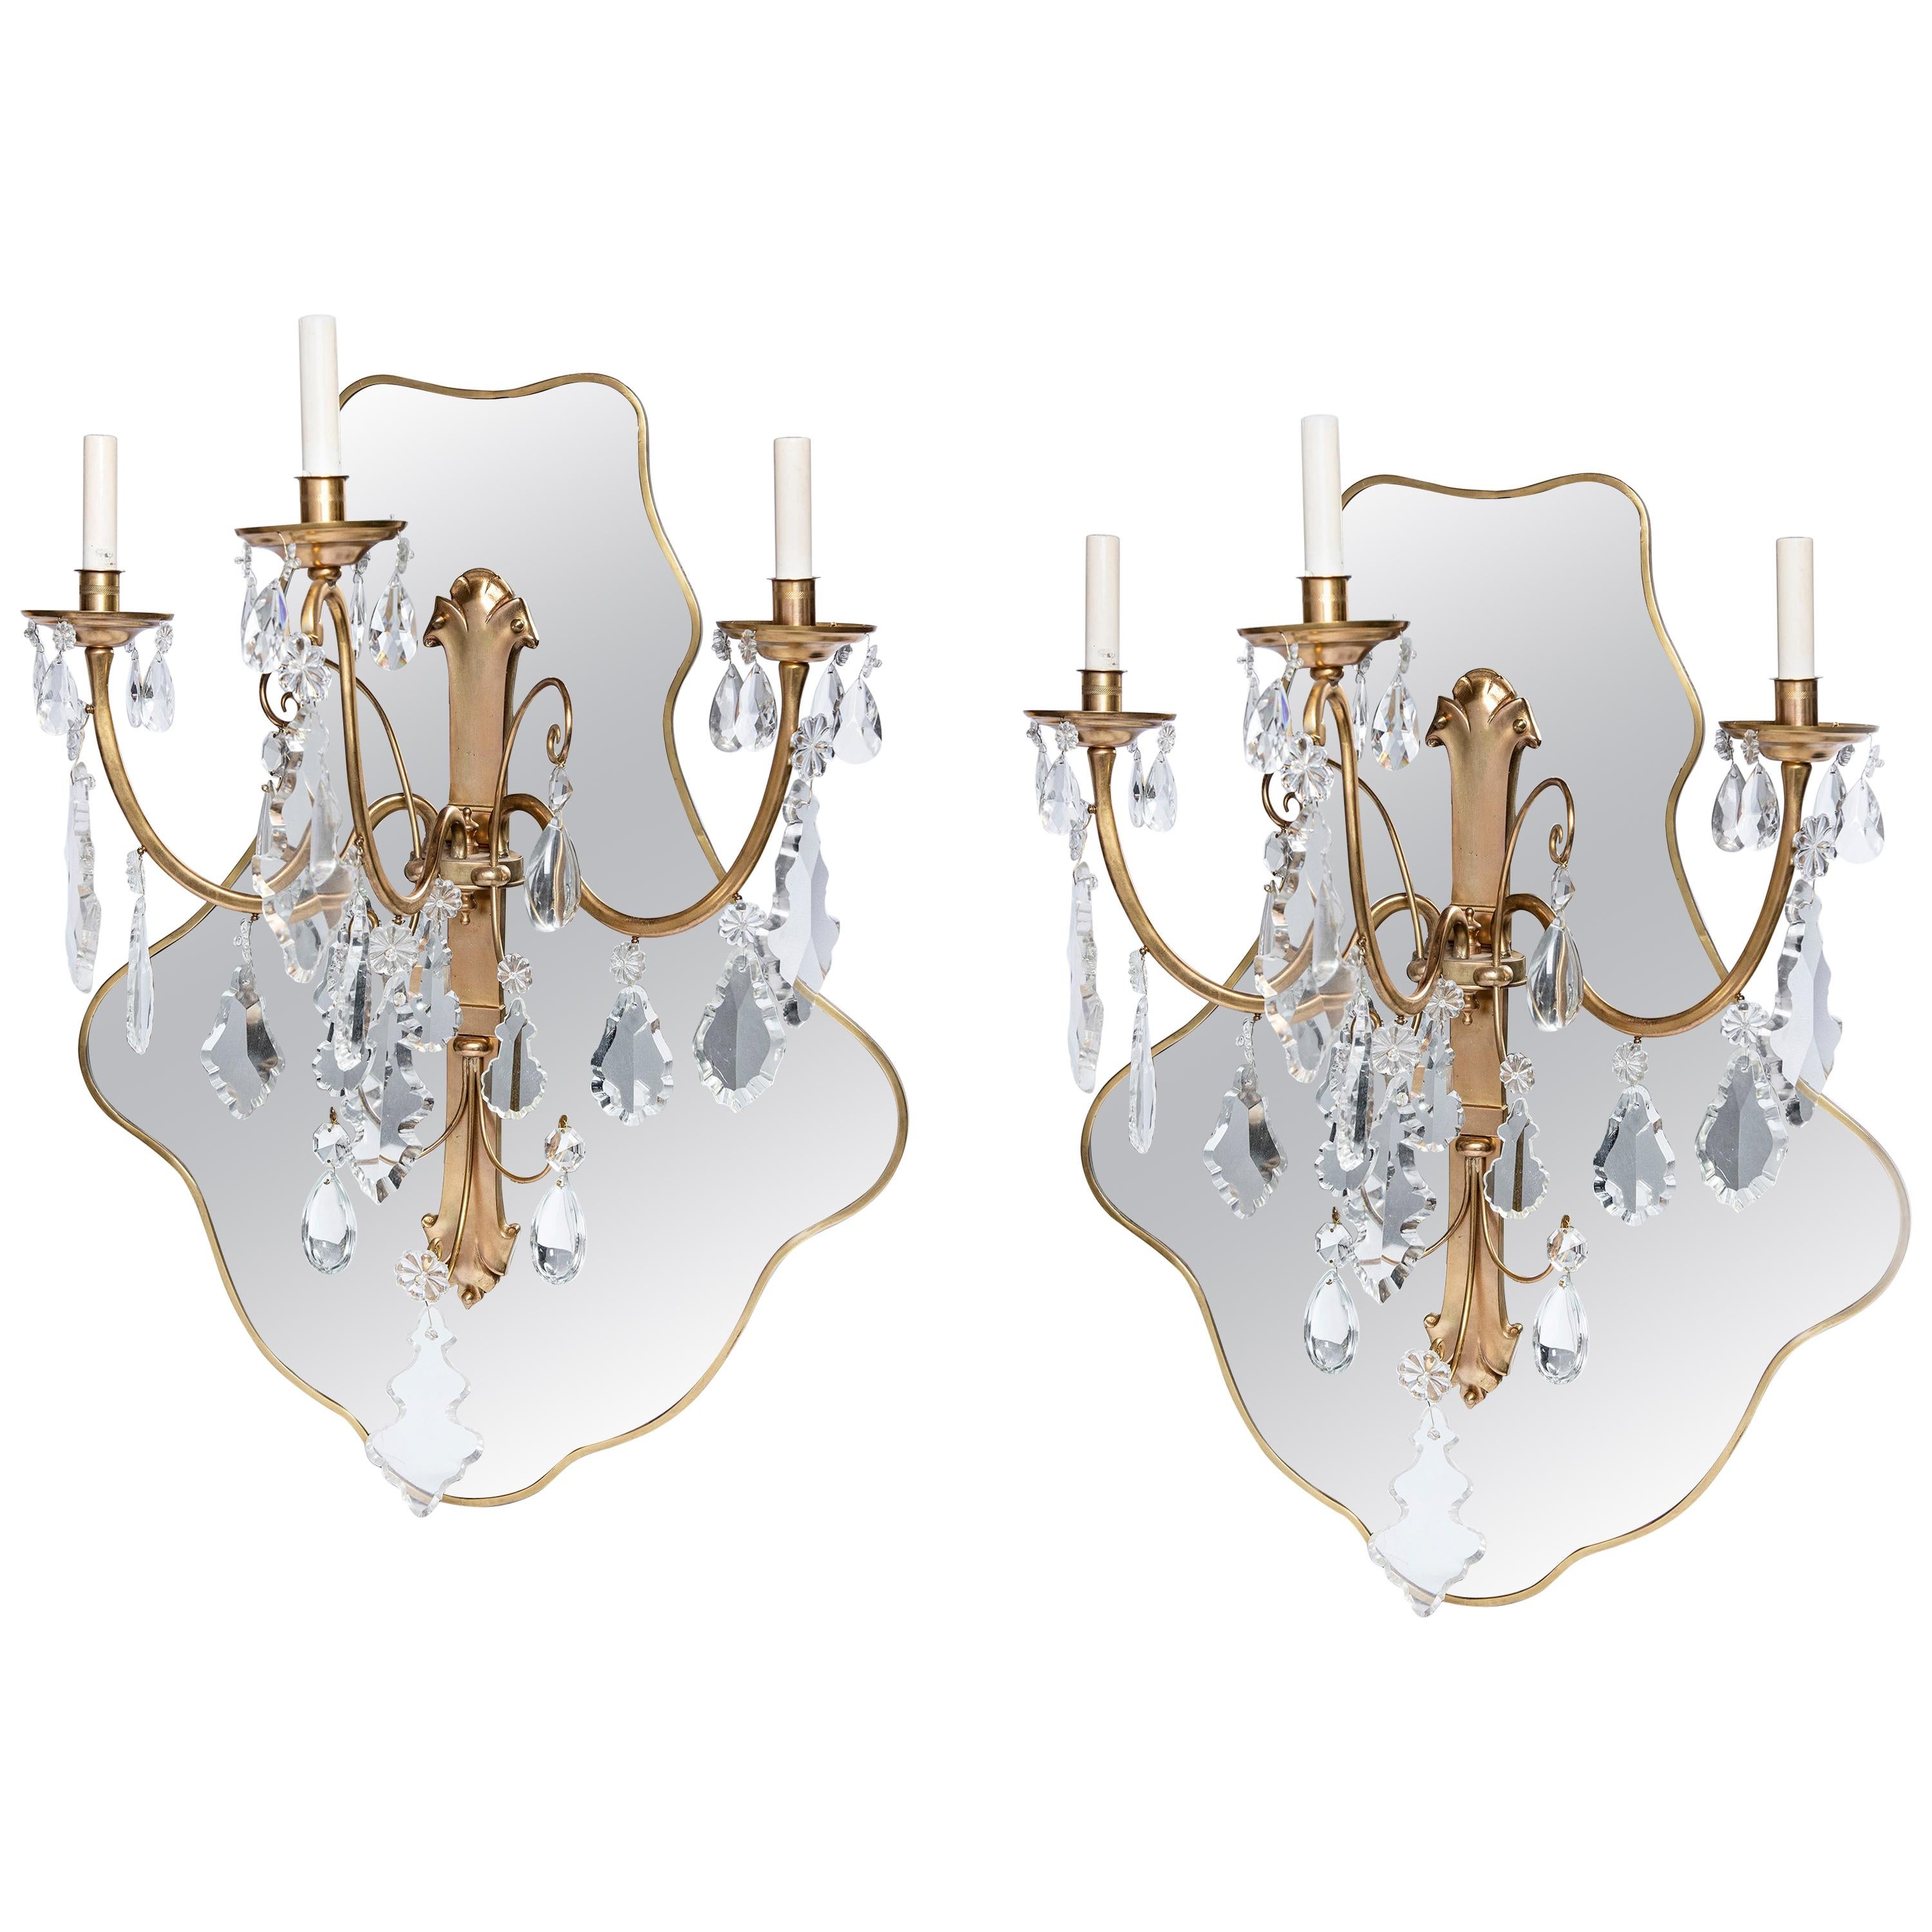 Pair of Bronze and Crystal Sconces with Mirror, France, Early 20th Century